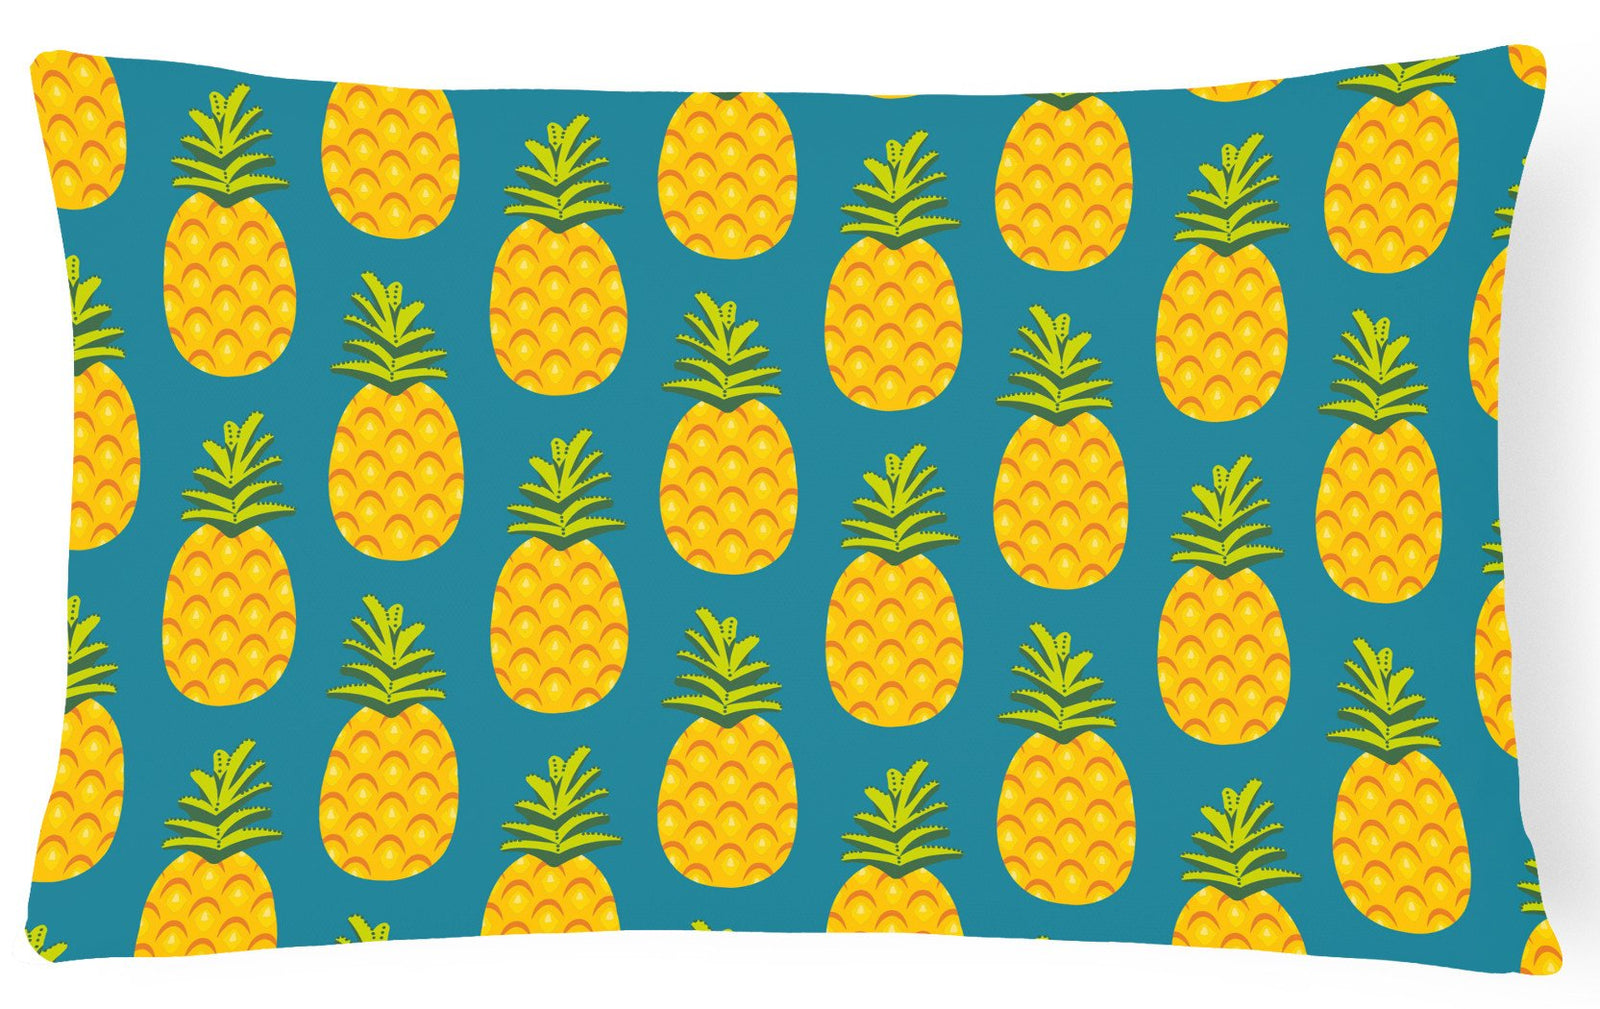 Pineapples on Teal Canvas Fabric Decorative Pillow BB5145PW1216 by Caroline's Treasures